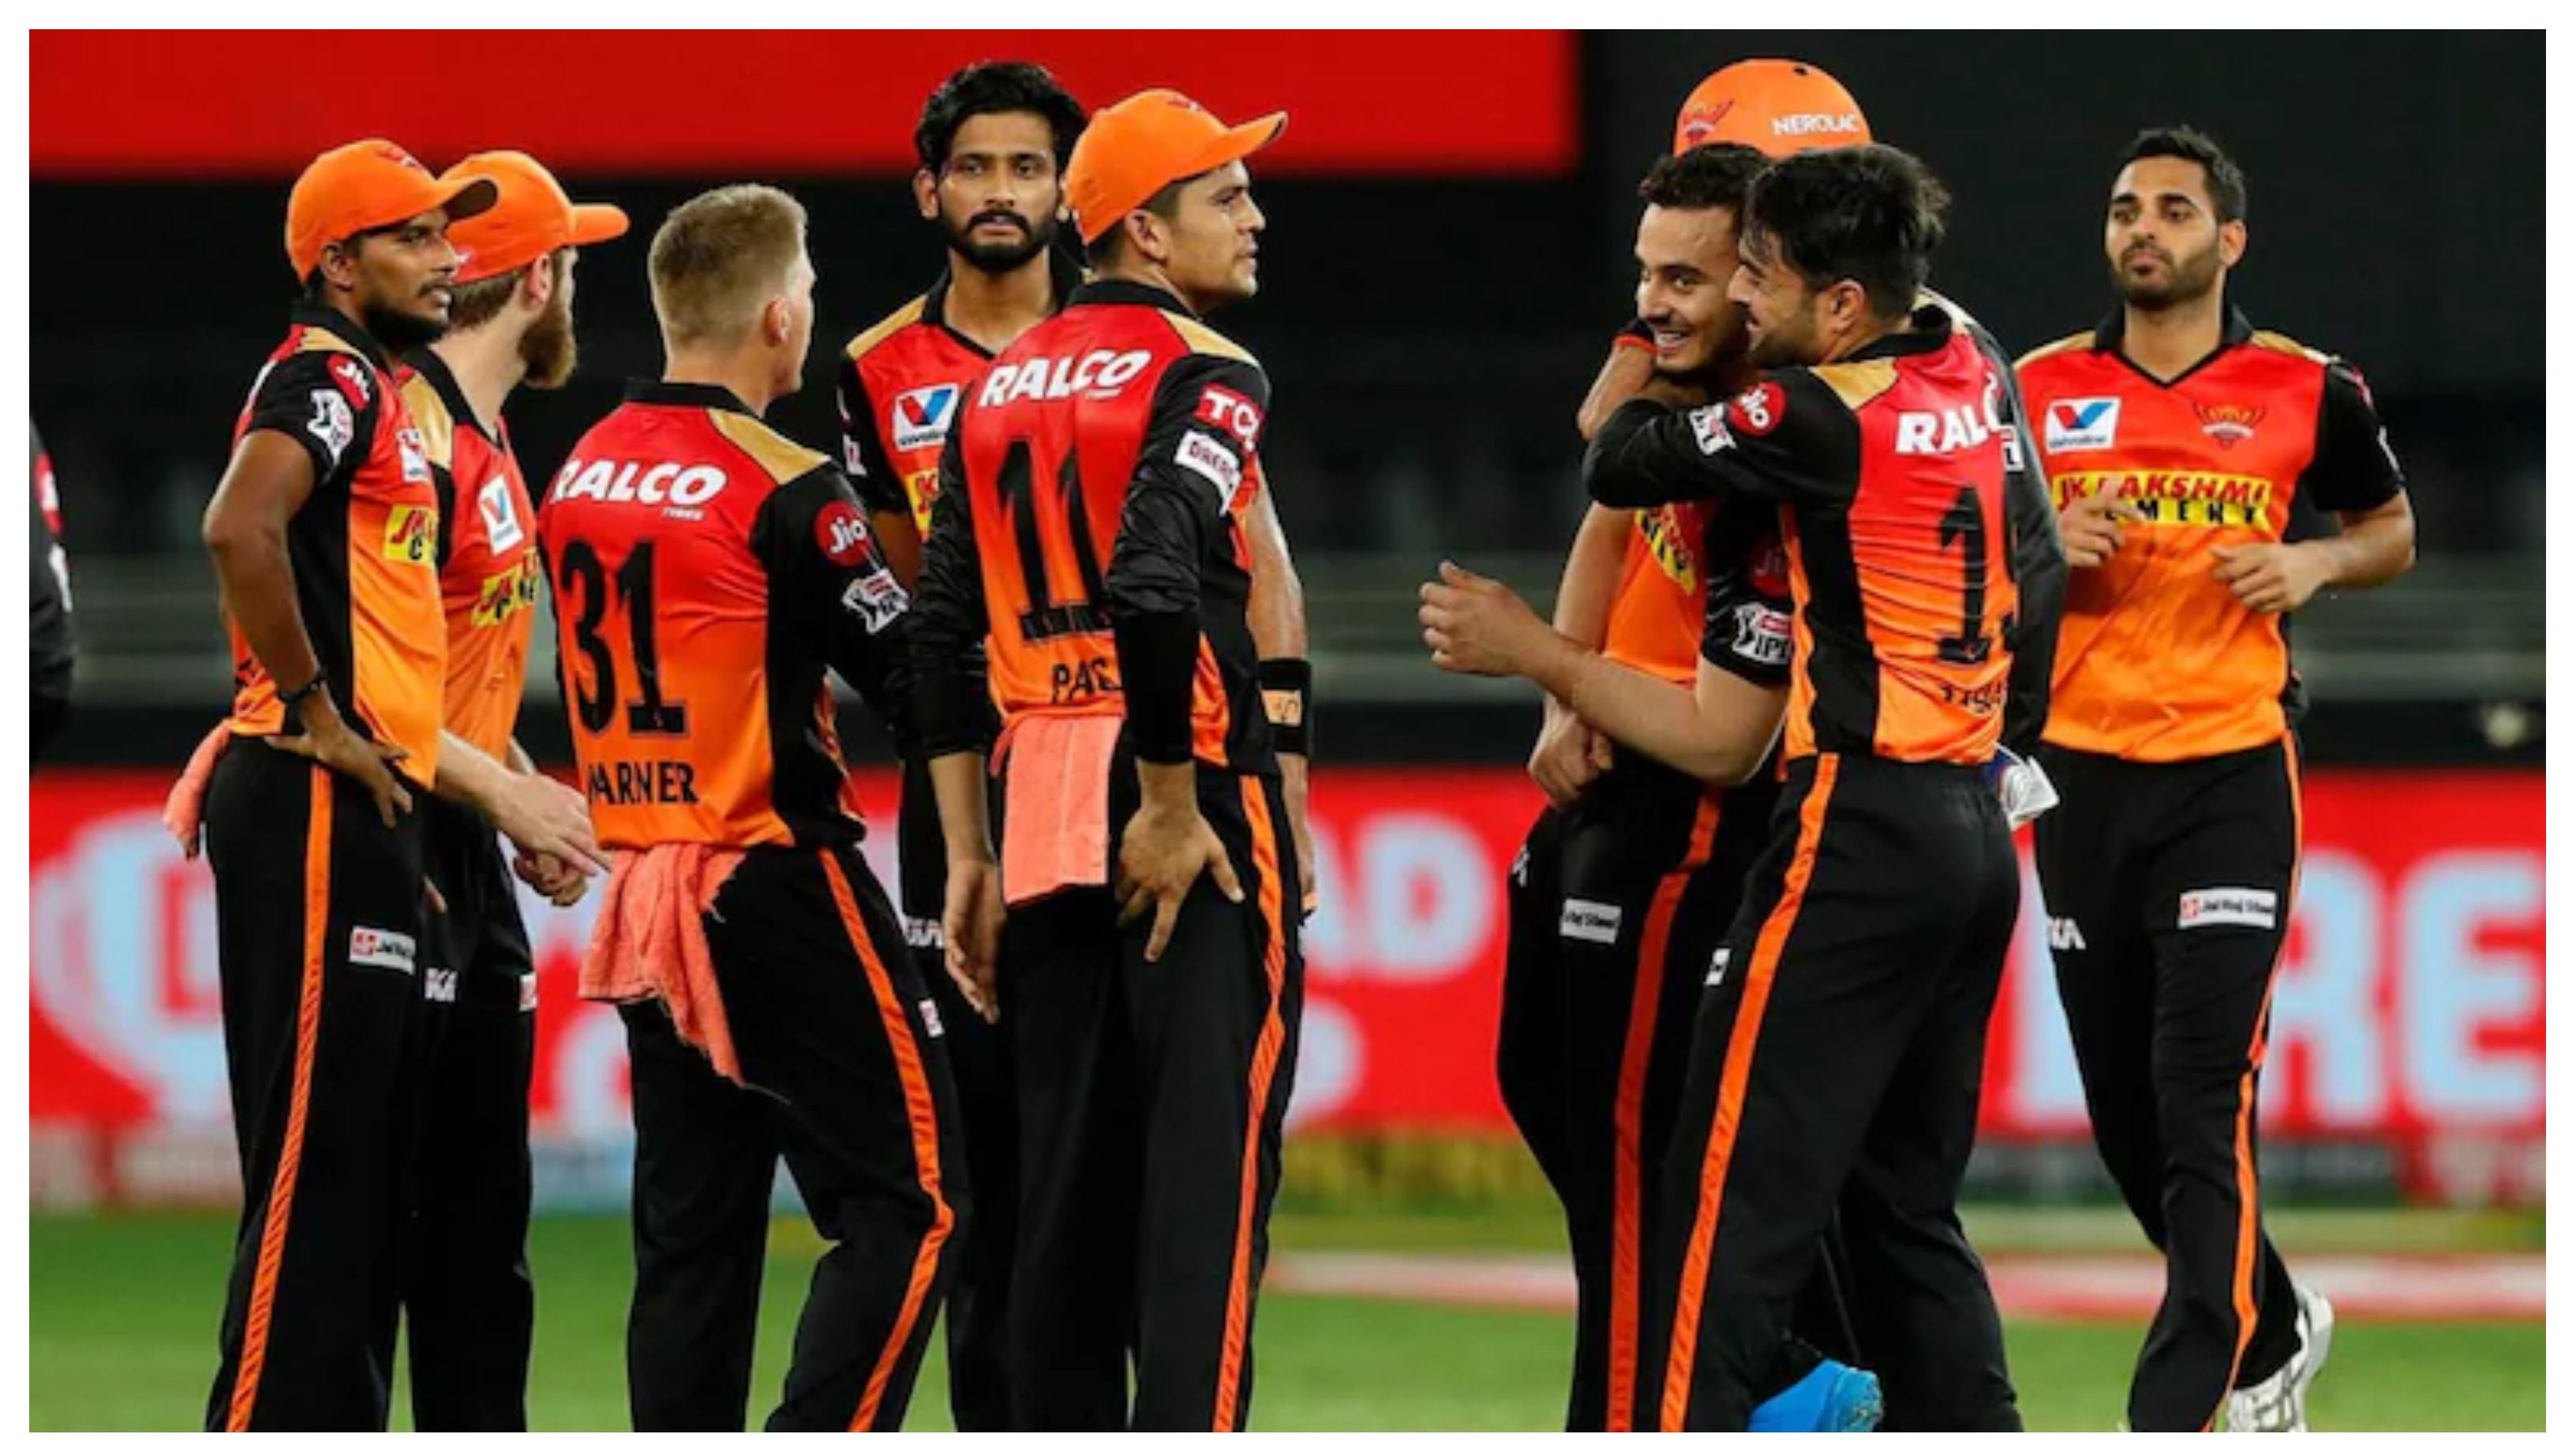 Sunrisers Hyderabad donate hefty sum of INR 30 crores to aid India’s COVID-19 fight